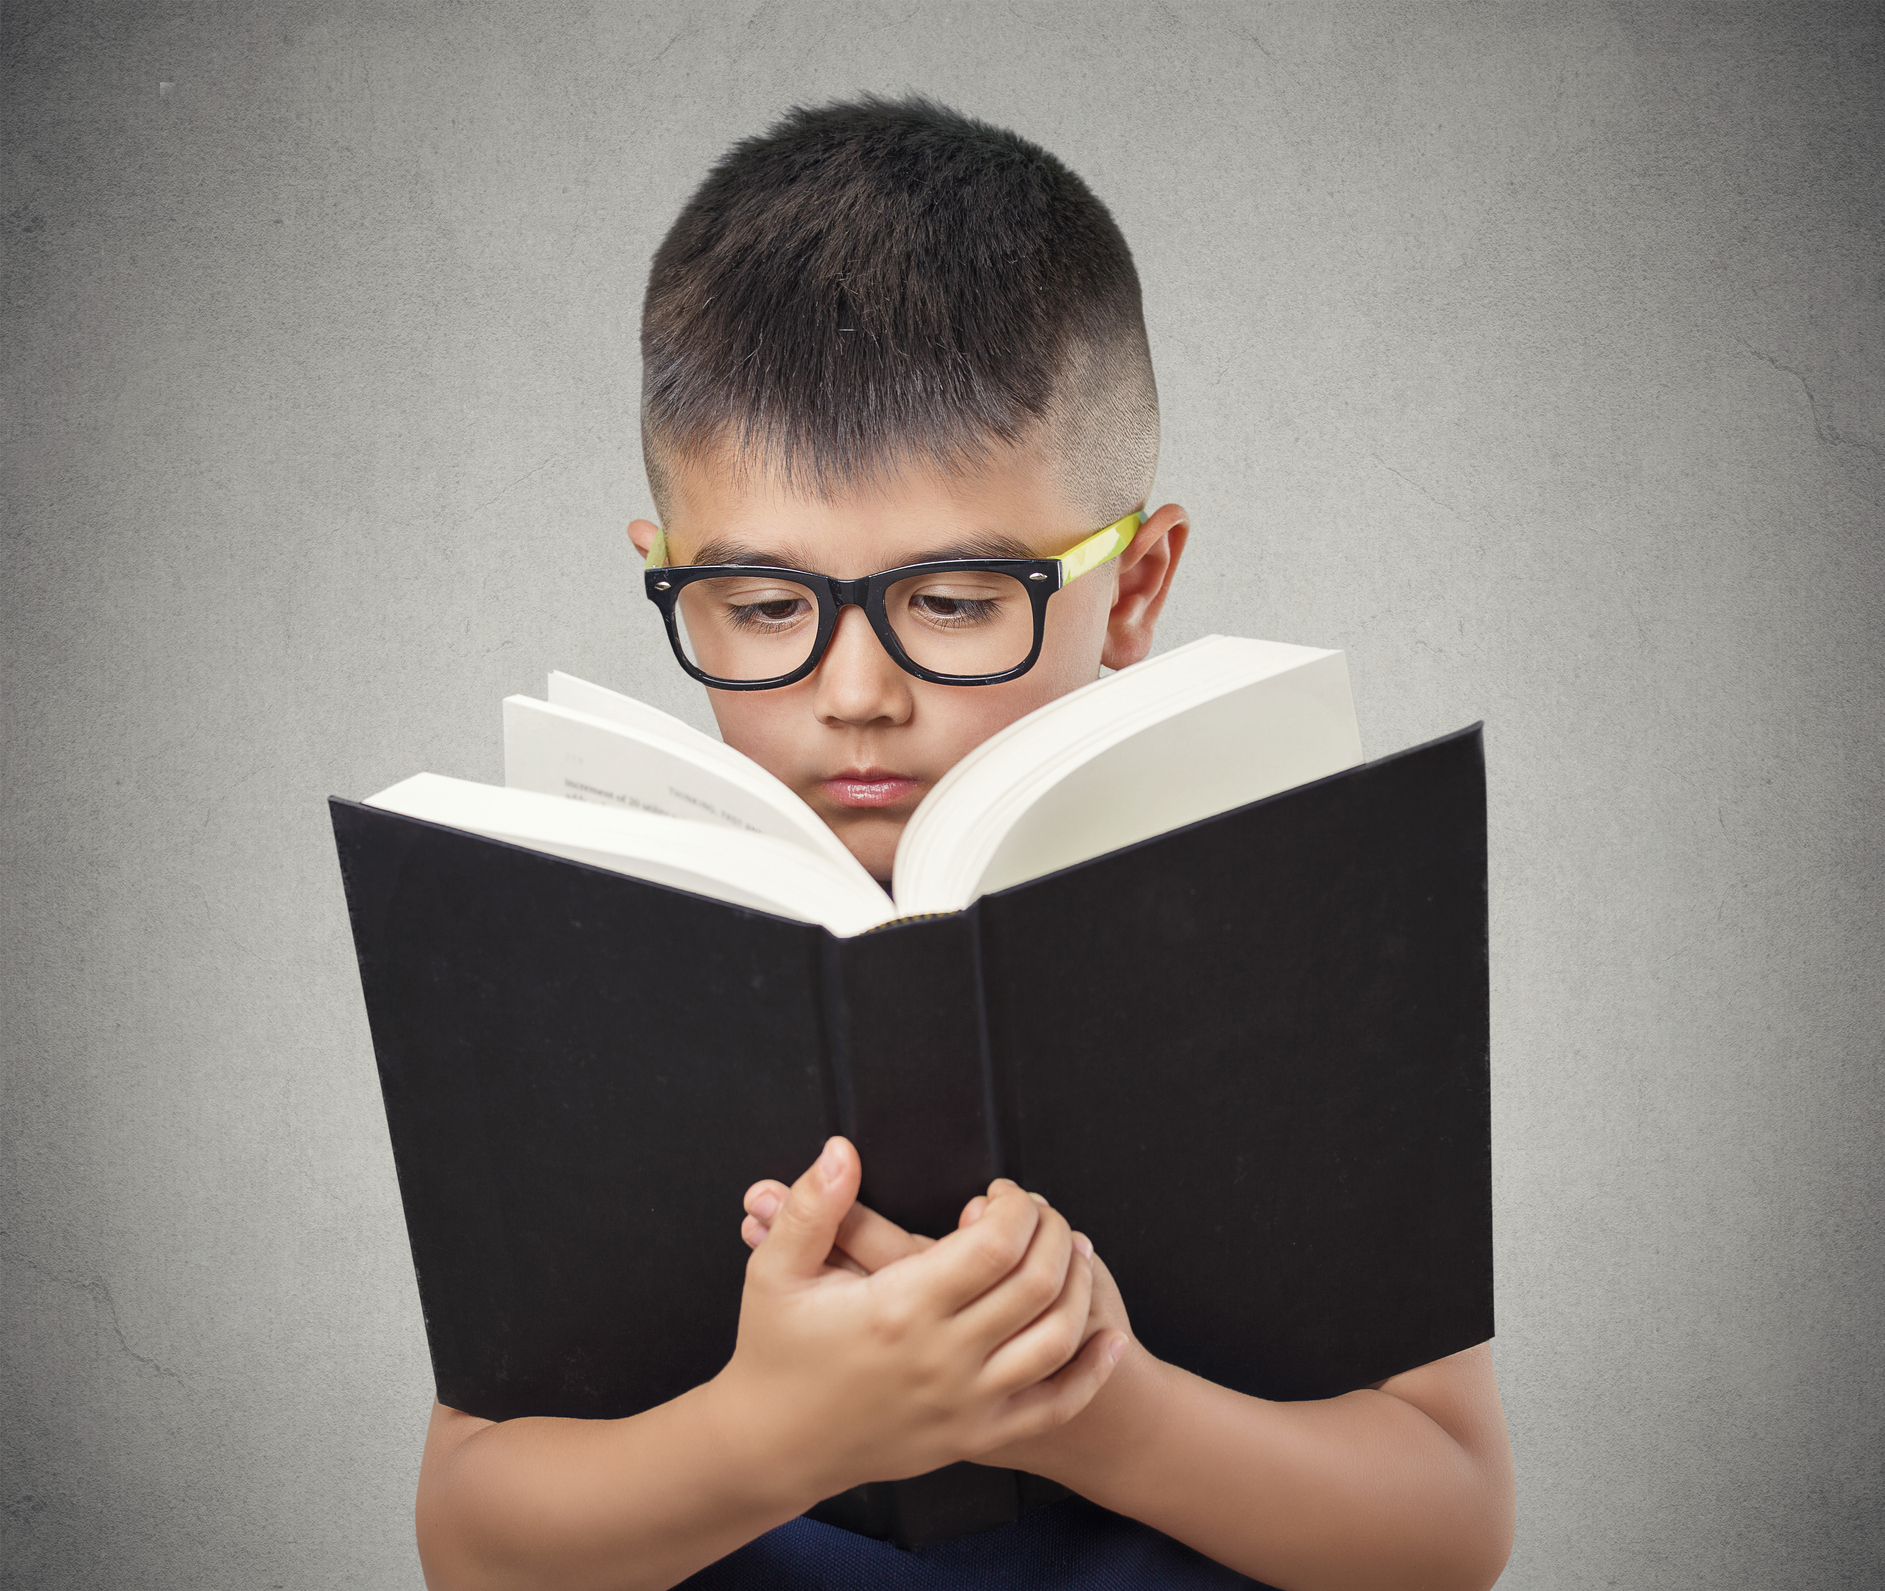 closeup portrait child boy with glasses reading holding book too close having difficulty to see text,